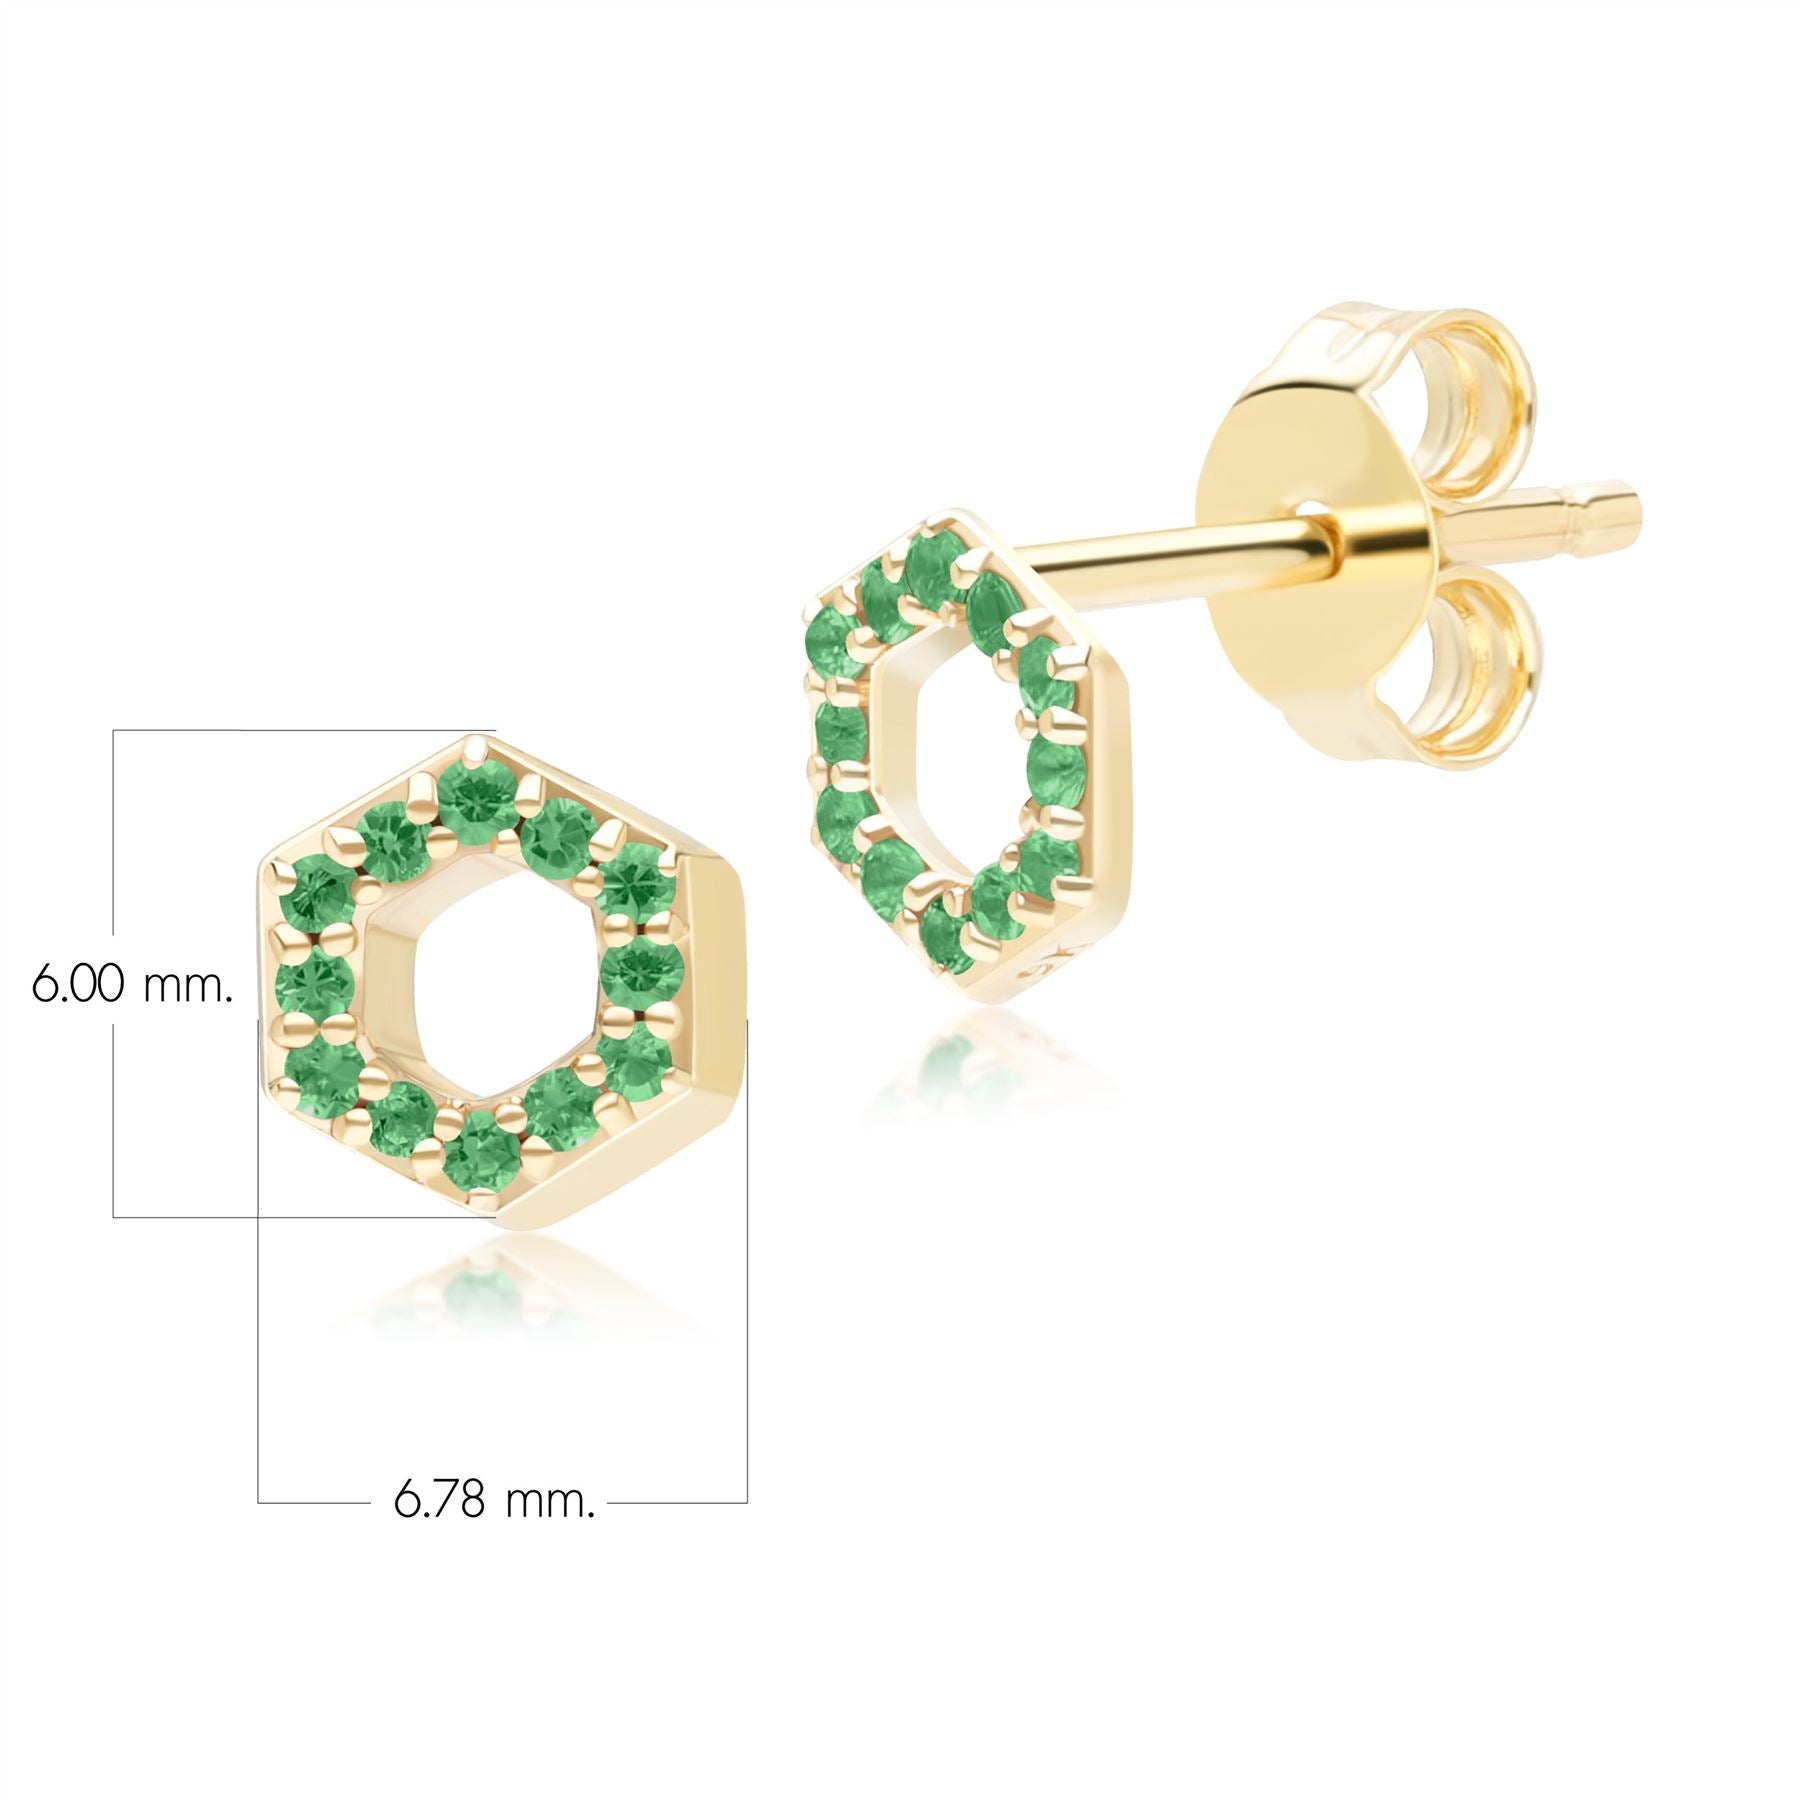 Geometric Hex Emerald Stud Earrings in 9ct Yellow Gold Dimensions 